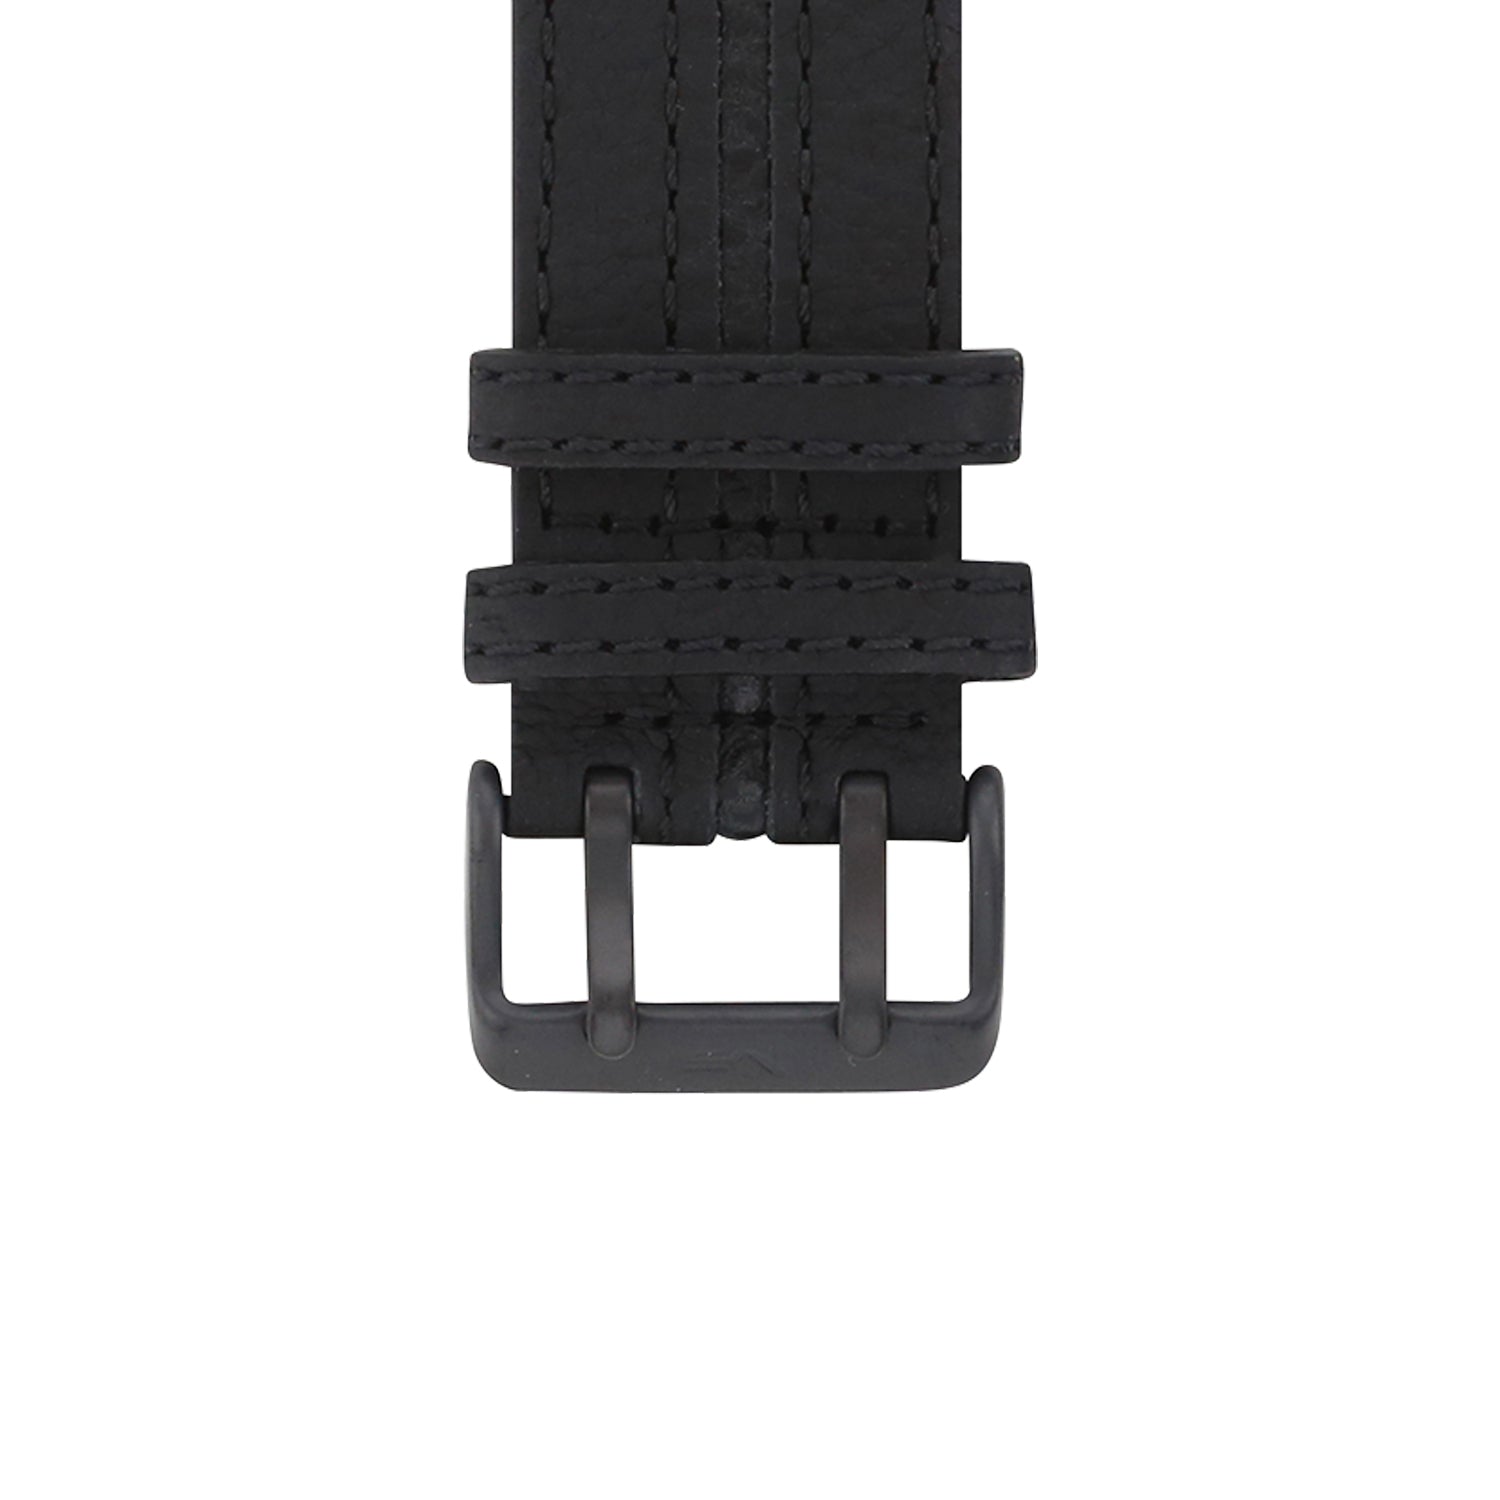 EXPEDITION BLACK LEATHER STRAP 24mm - BLACK BUCKLE